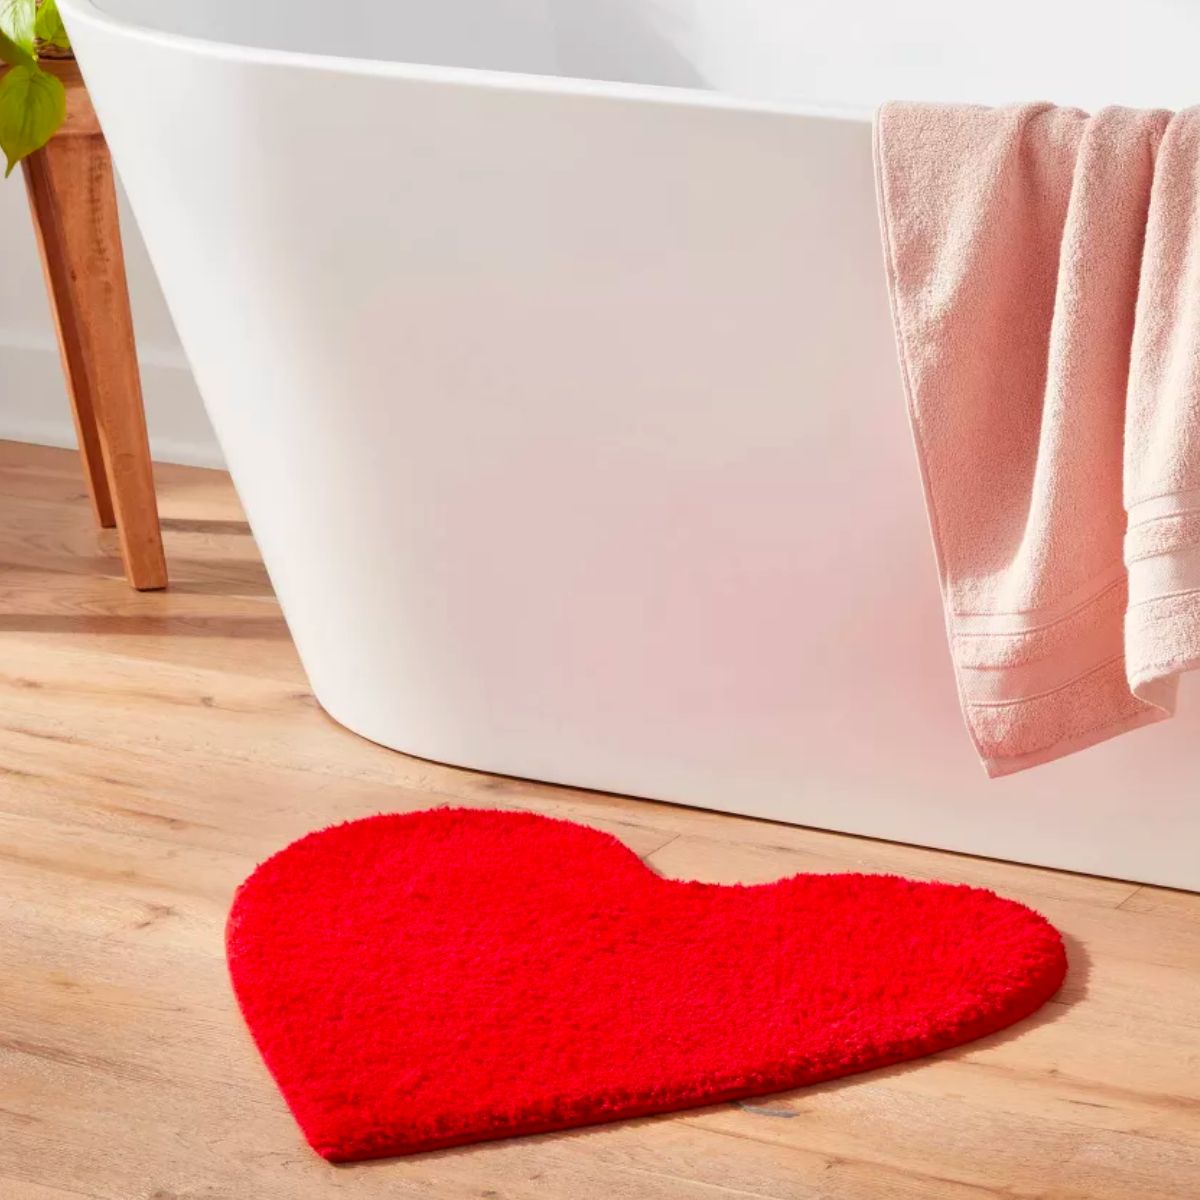 https://hip2save.com/wp-content/uploads/2023/07/Threshold-Valentines-Heart-Shaped-Bath-Rug-in-Red-.jpg?resize=1200%2C1200&strip=all